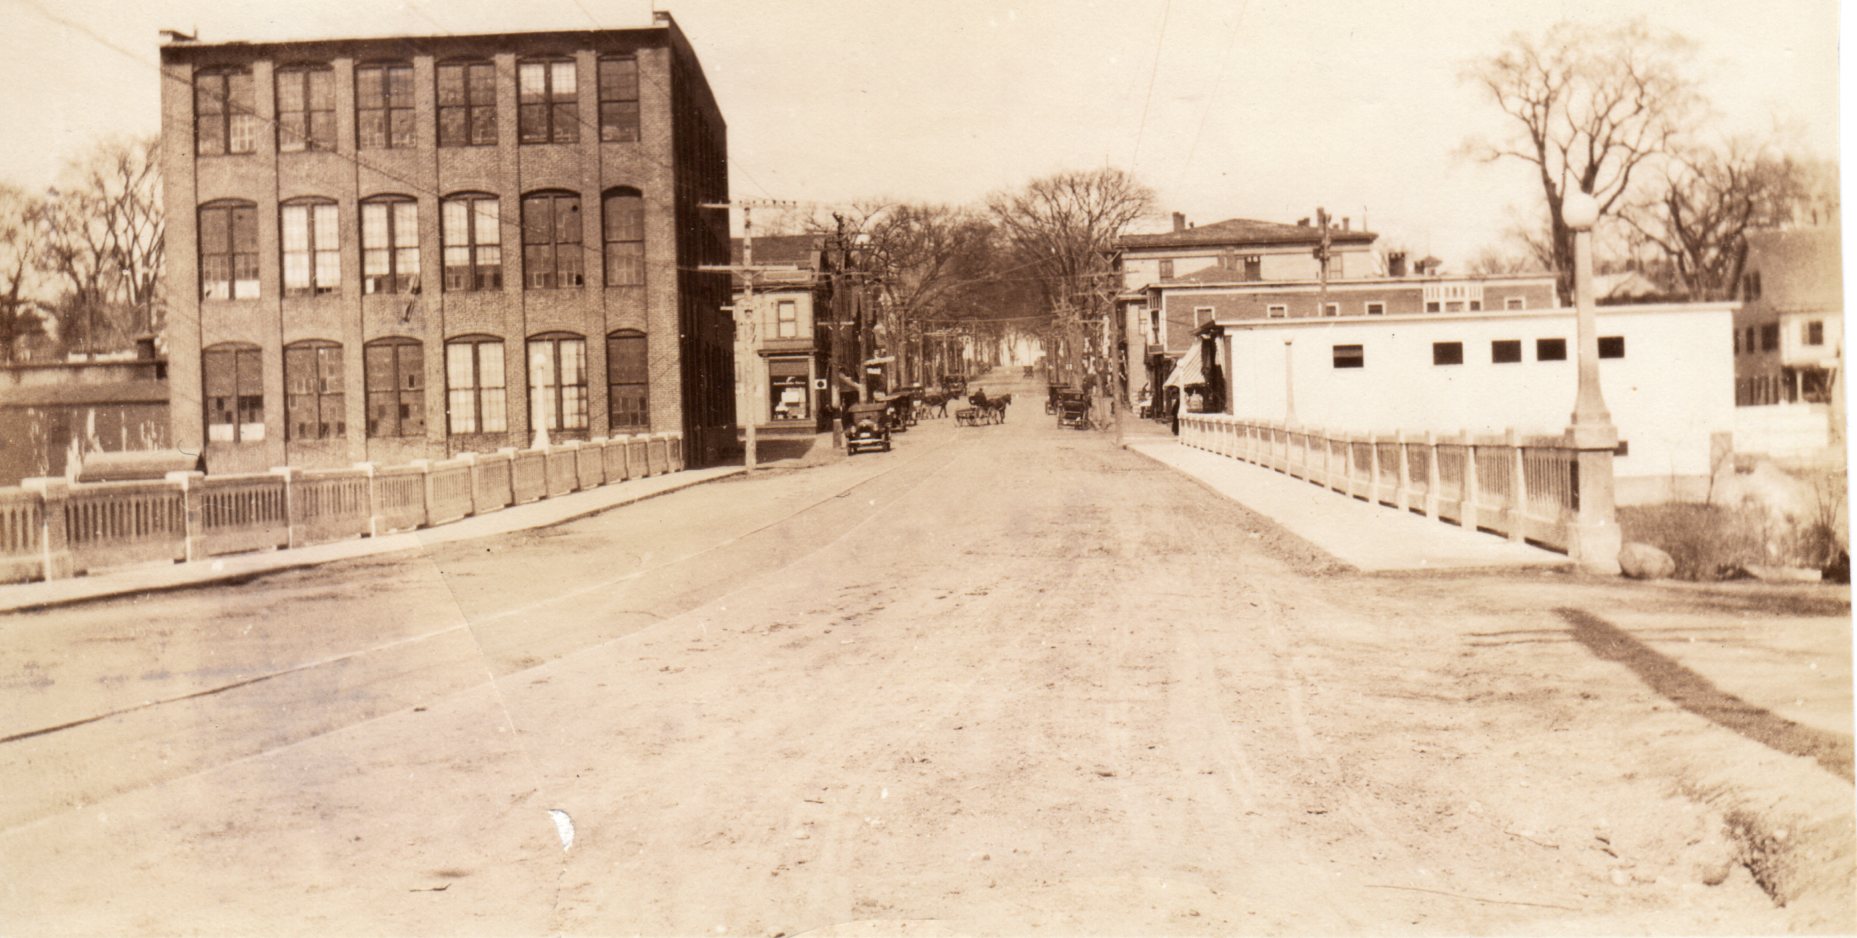 Main Street looking north over the Mousam River bridge, c.1920